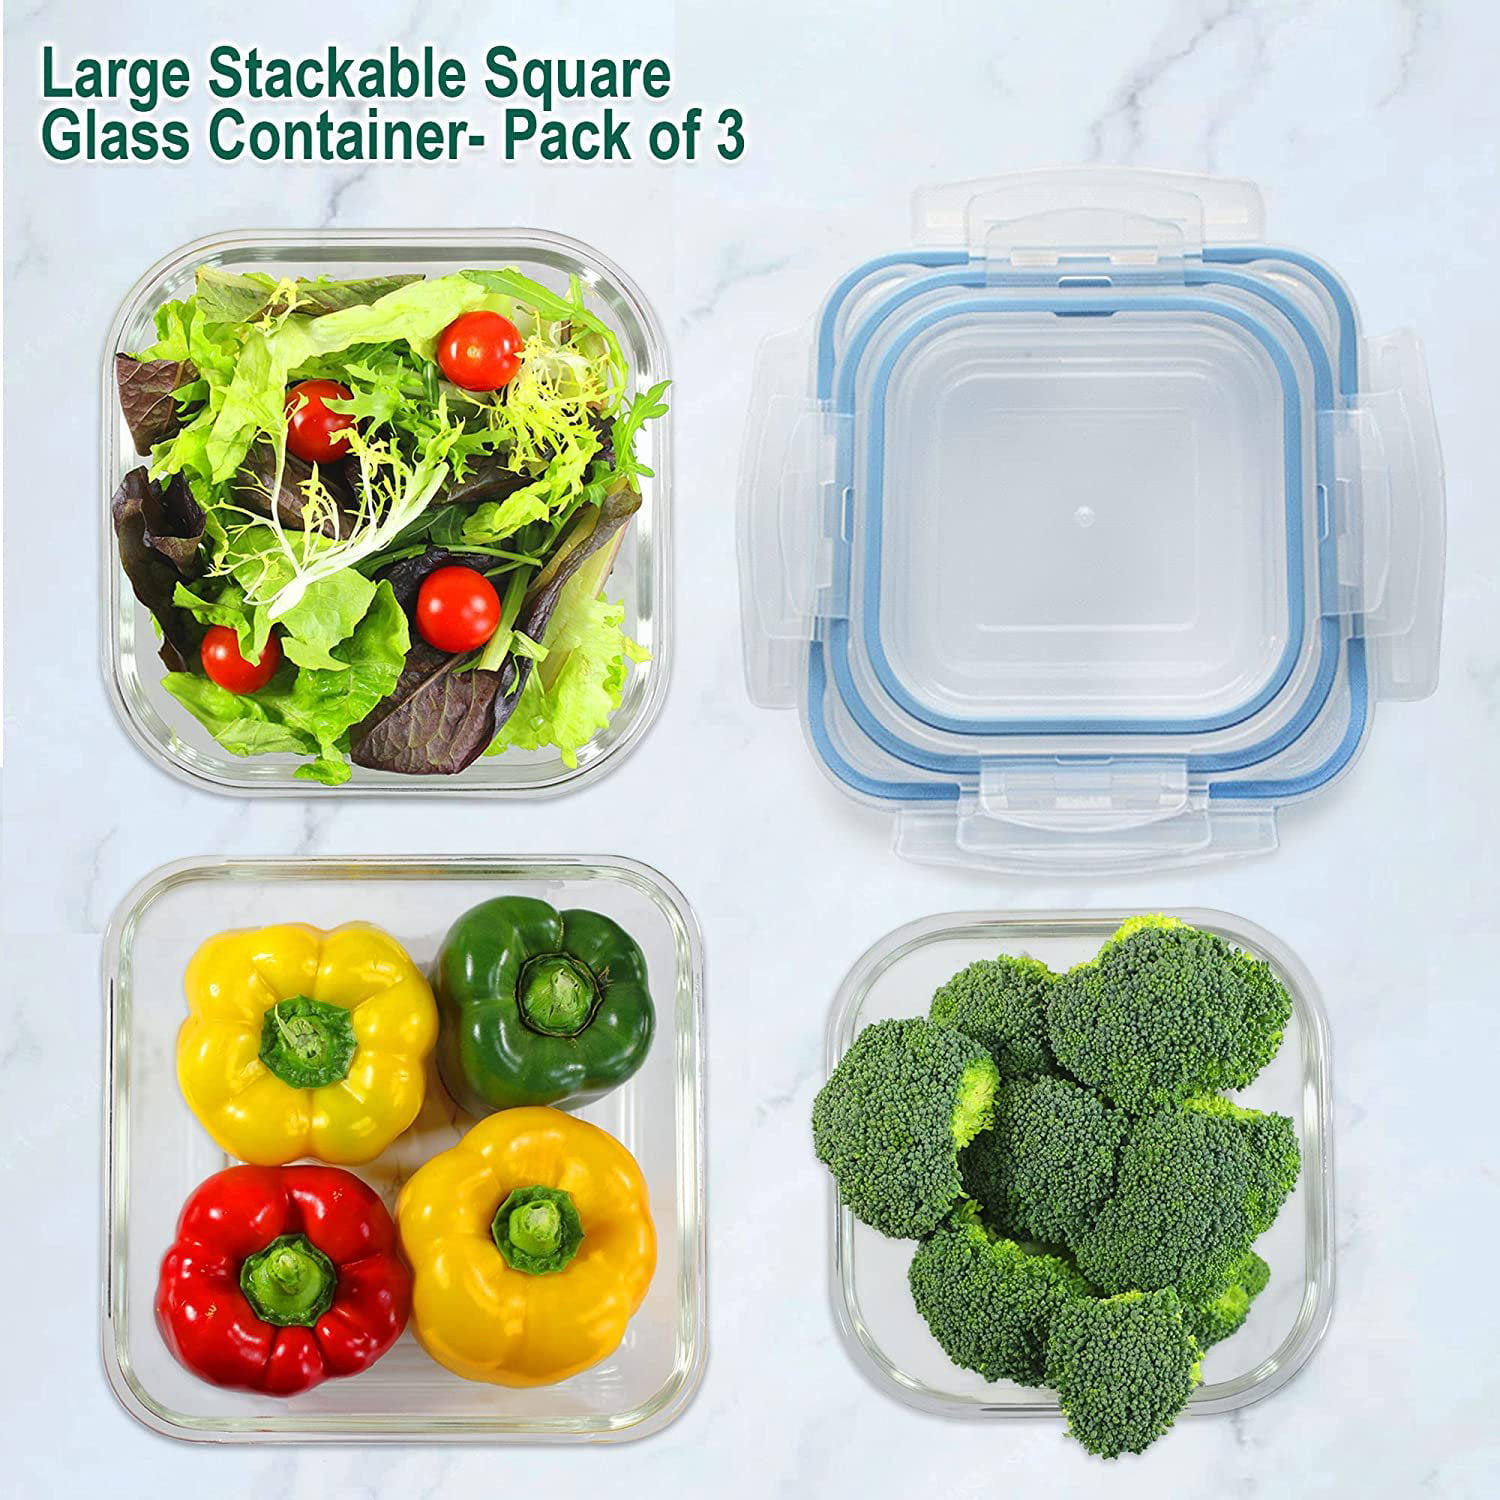 Ehi's Glass Food Storage Containers Set - Meal Prep Container with Lids - 100% Leakproof, BPA-Free & Airtight Containers, Freezer-to-Oven-Safe, Set